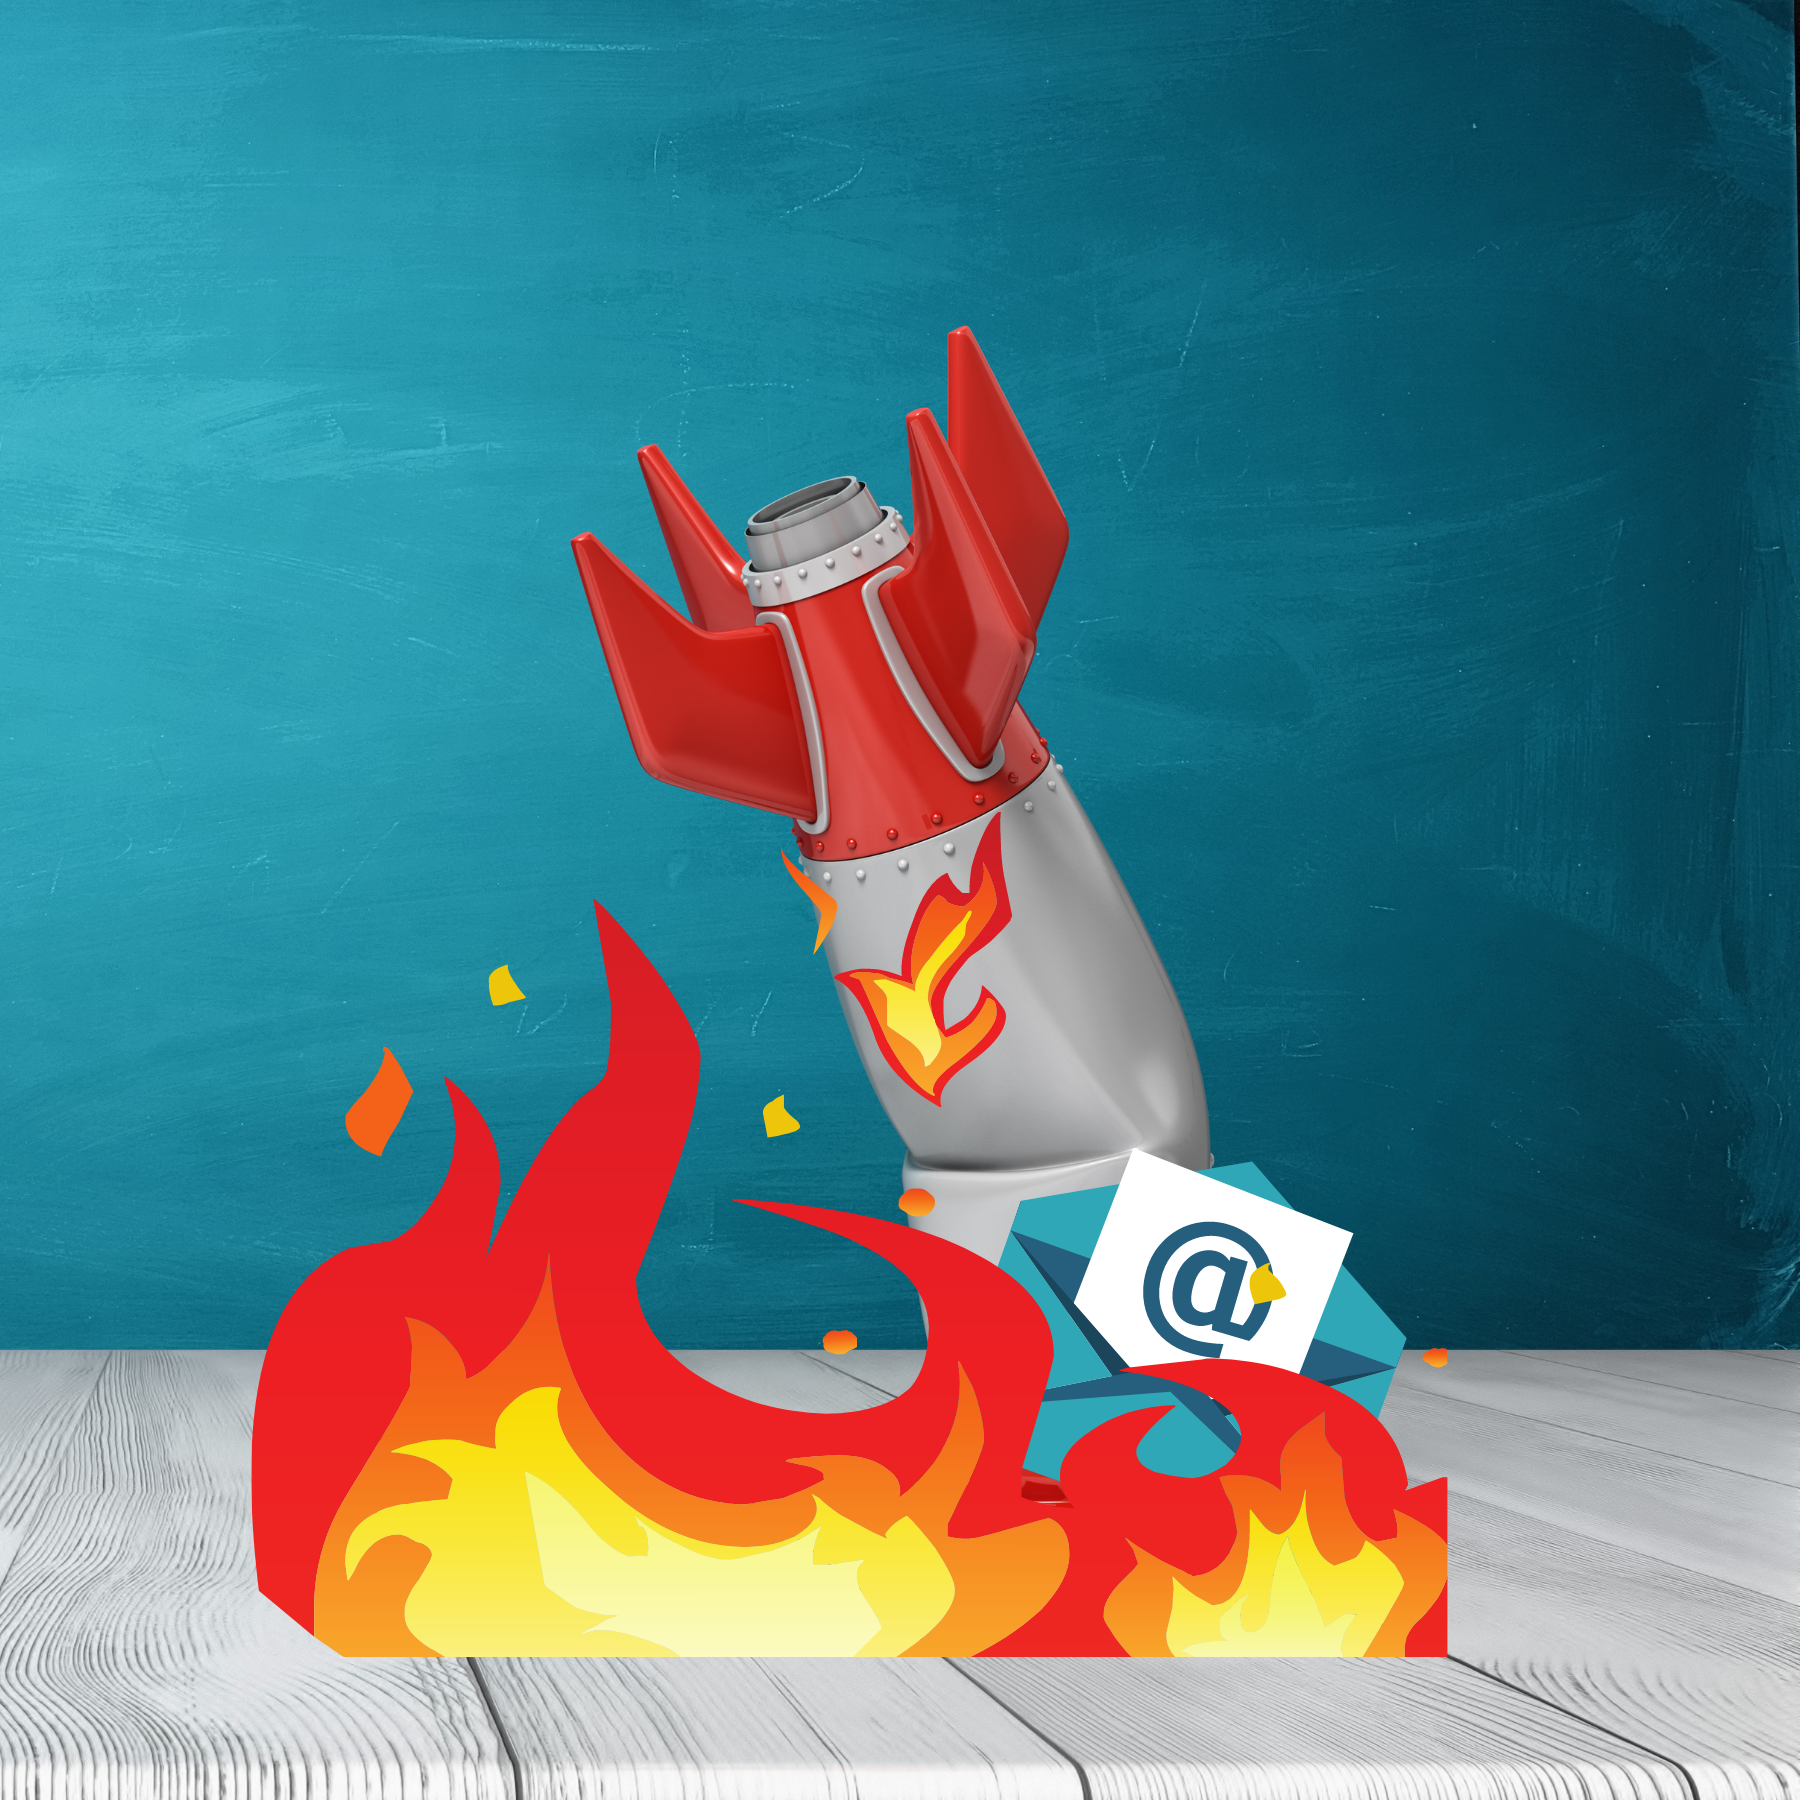 Merge Tags Can Improve Your Email Marketing… or DESTROY It